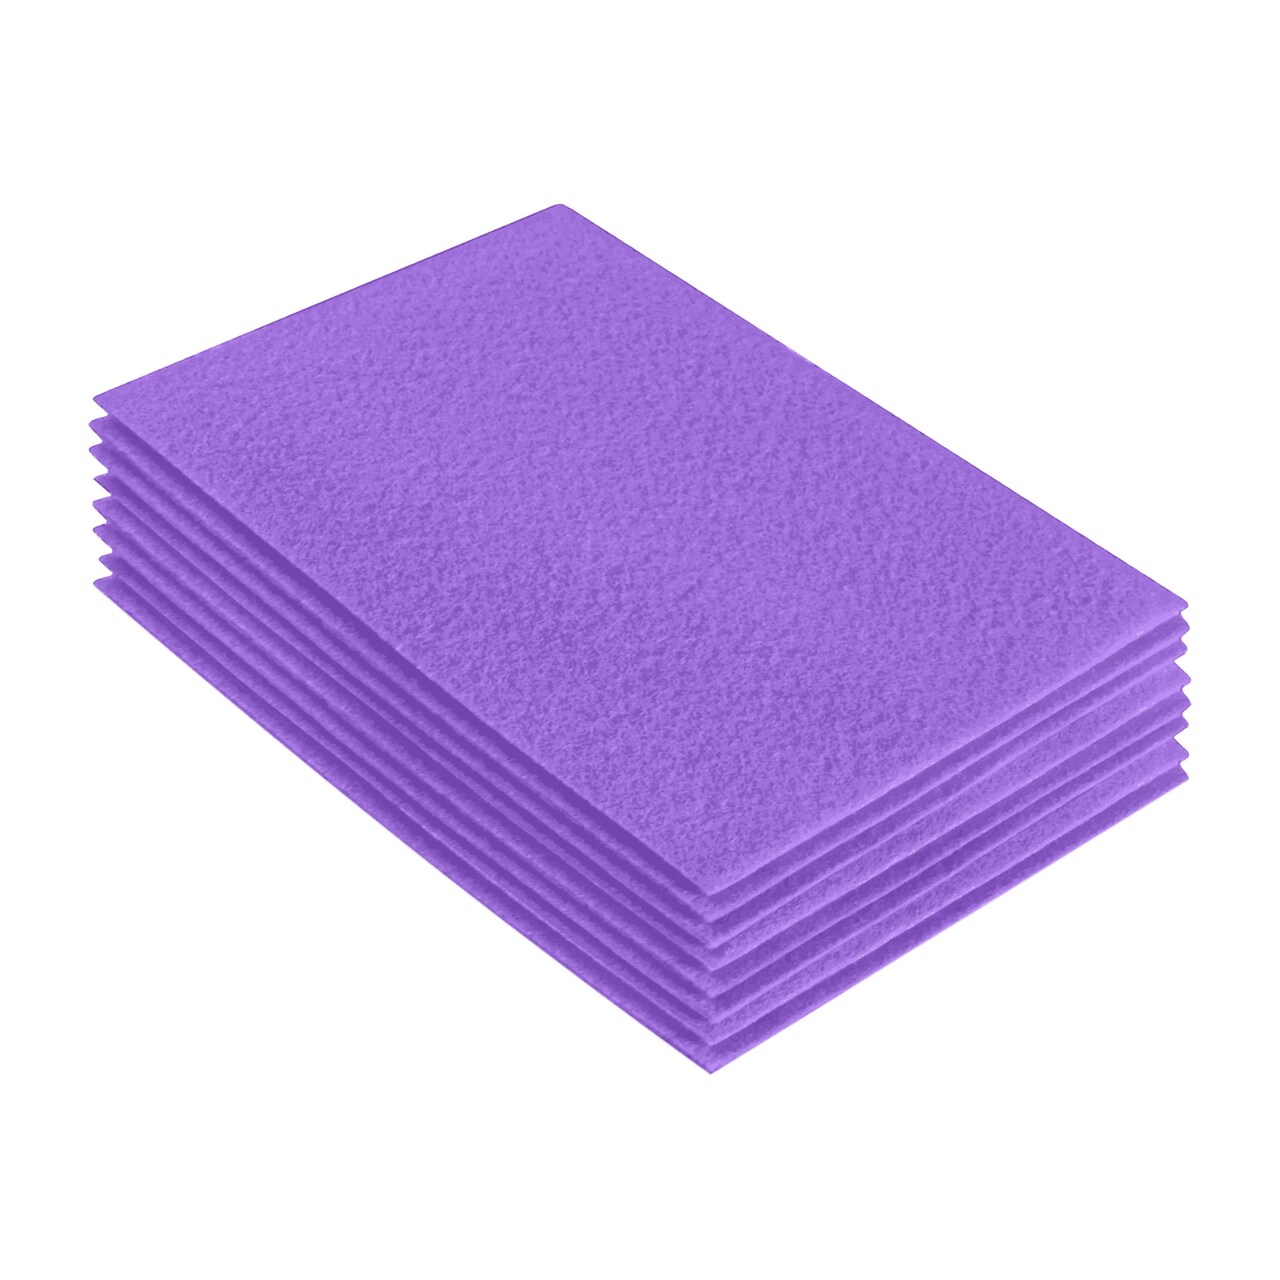 FabricLA Acrylic Felt Sheets for Crafts - Precut 9 X 12 Inches (20 cm X  30 cm) Felt Squares - Use Felt Fabric Craft Sheets for DIY, Hobby, Costume,  and Decoration, Lavender